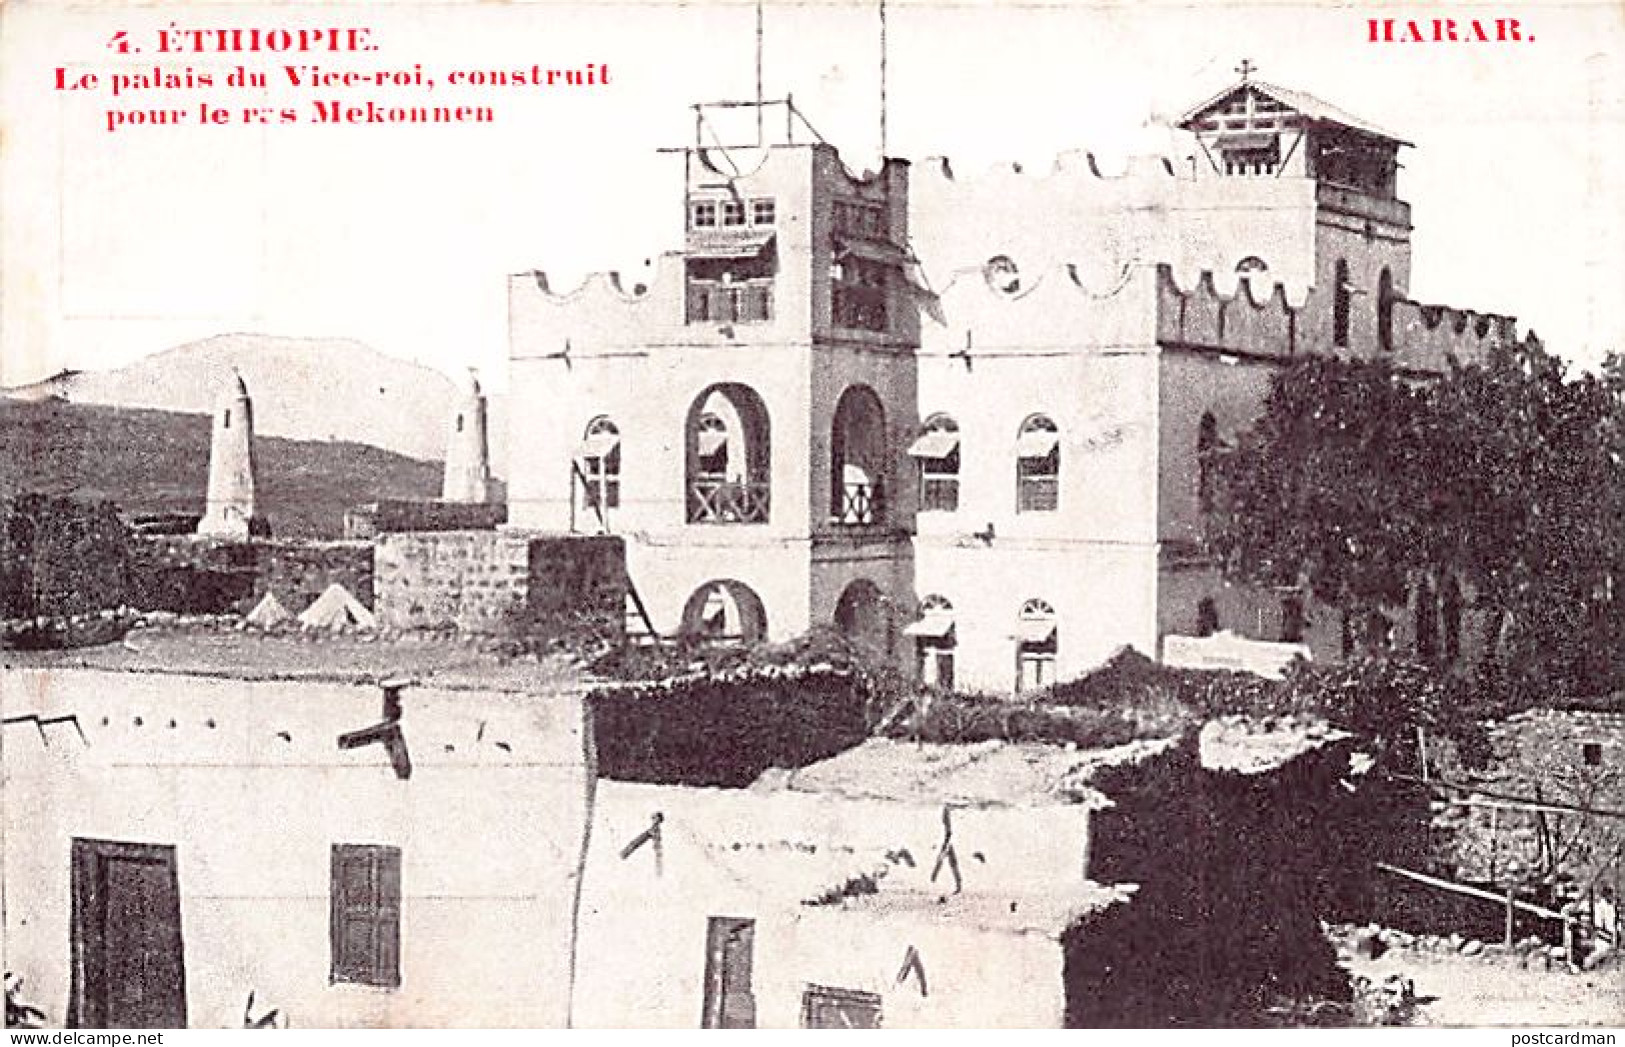 Ethiopia - HARAR - The Viceroy's Palace - Publ. St. Lazarus Printing House, Dire - Etiopia